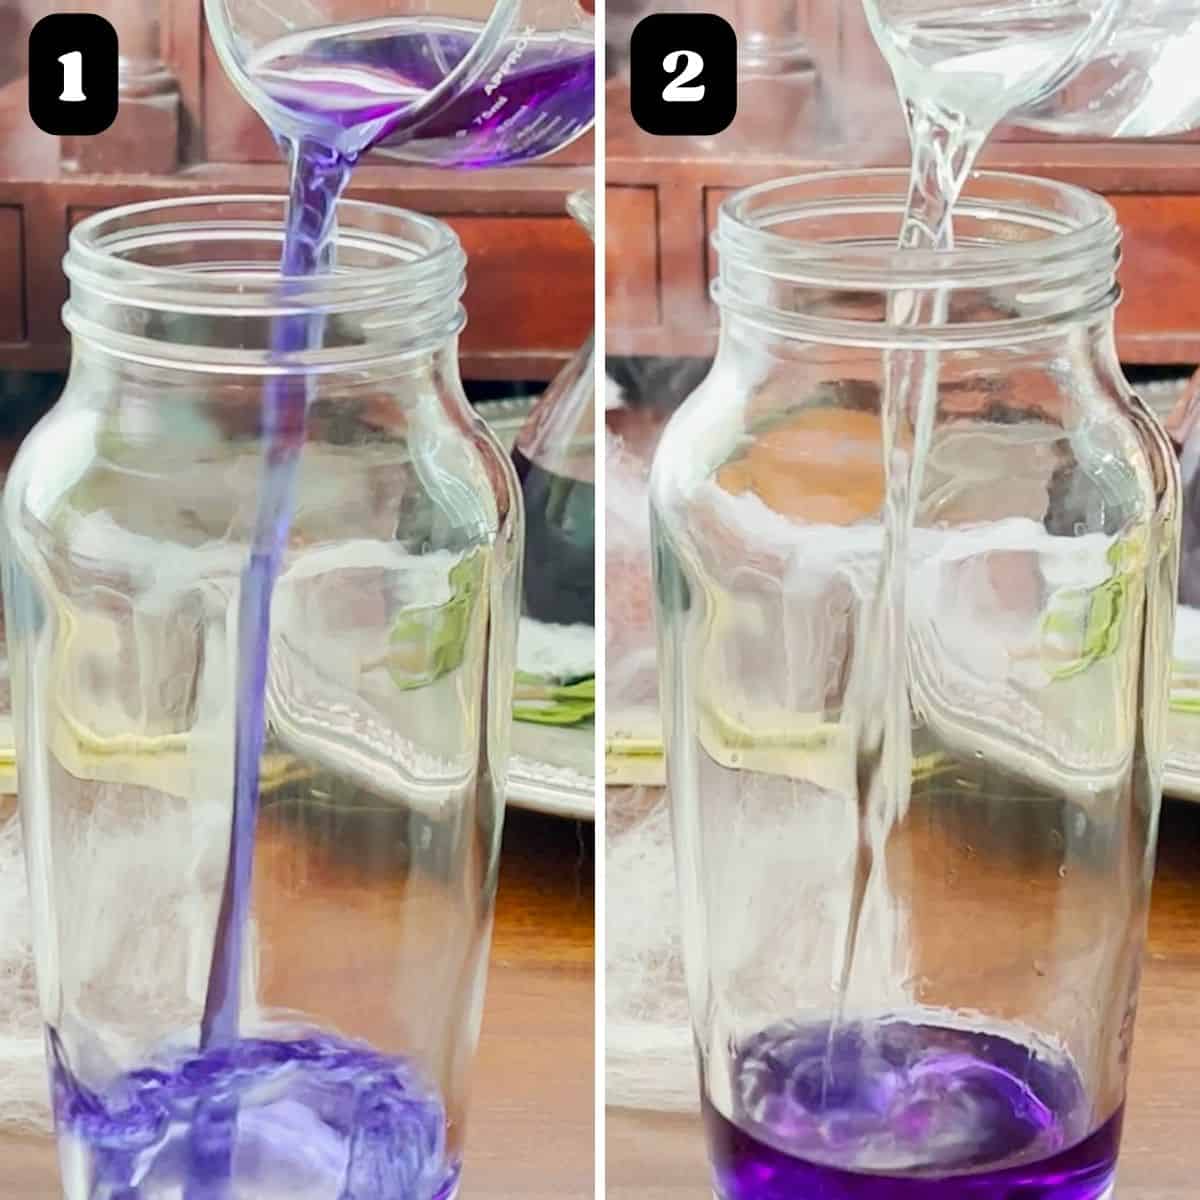 On left, butterfly pea flower vodka is poured into a shaker. On the right, orange liqueur is poured in.